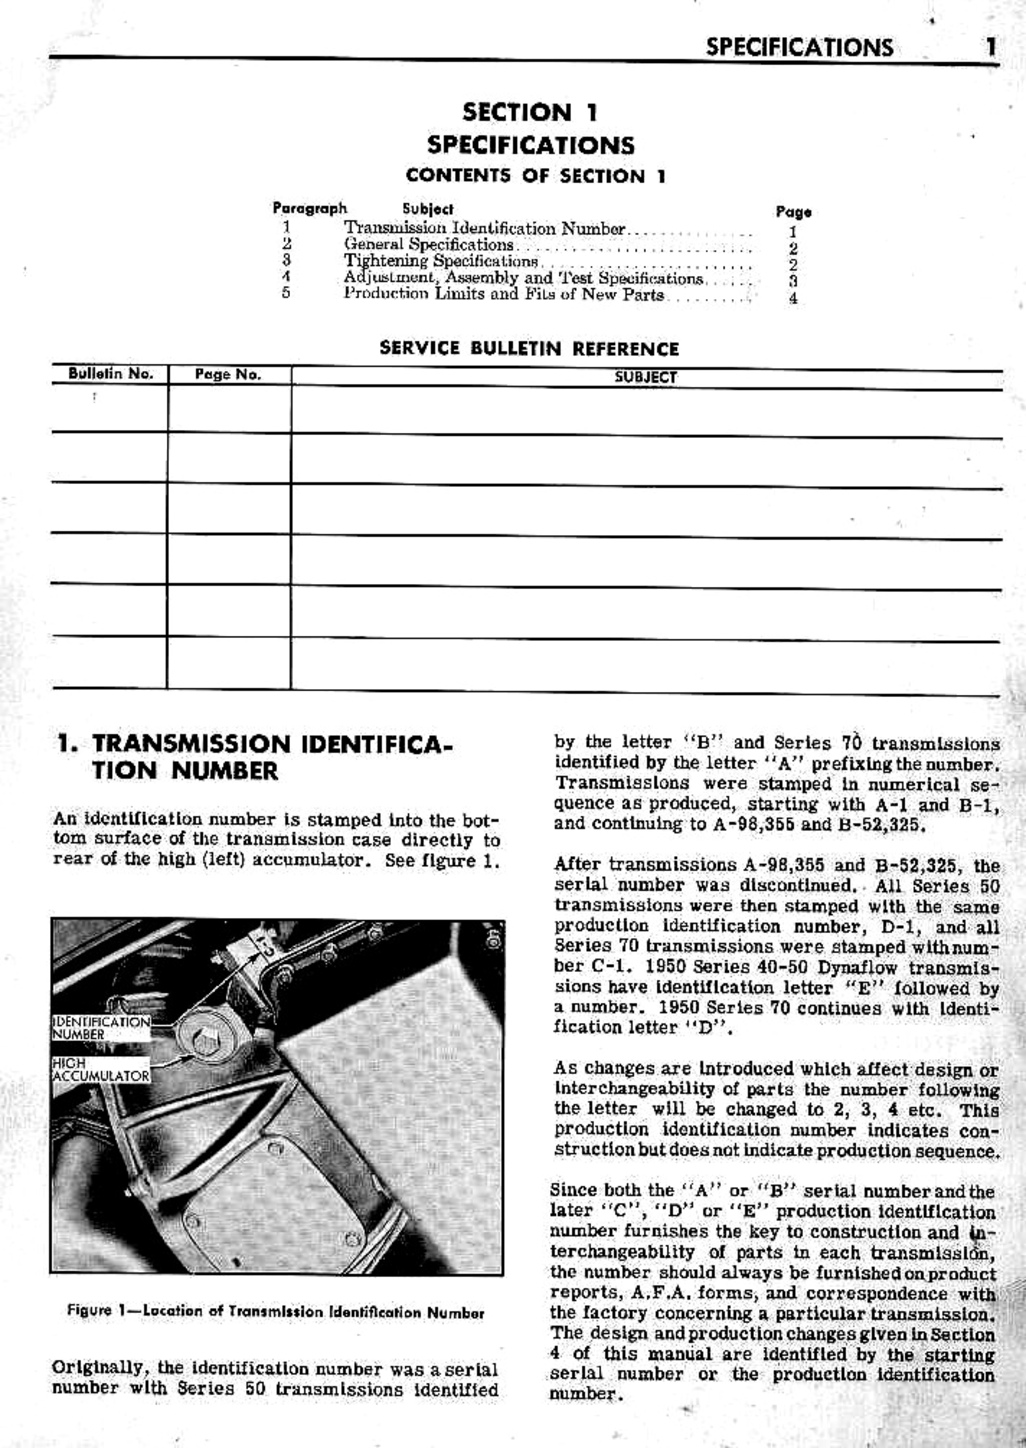 n_01 1948 Buick Transmission - Specifications-002-002.jpg